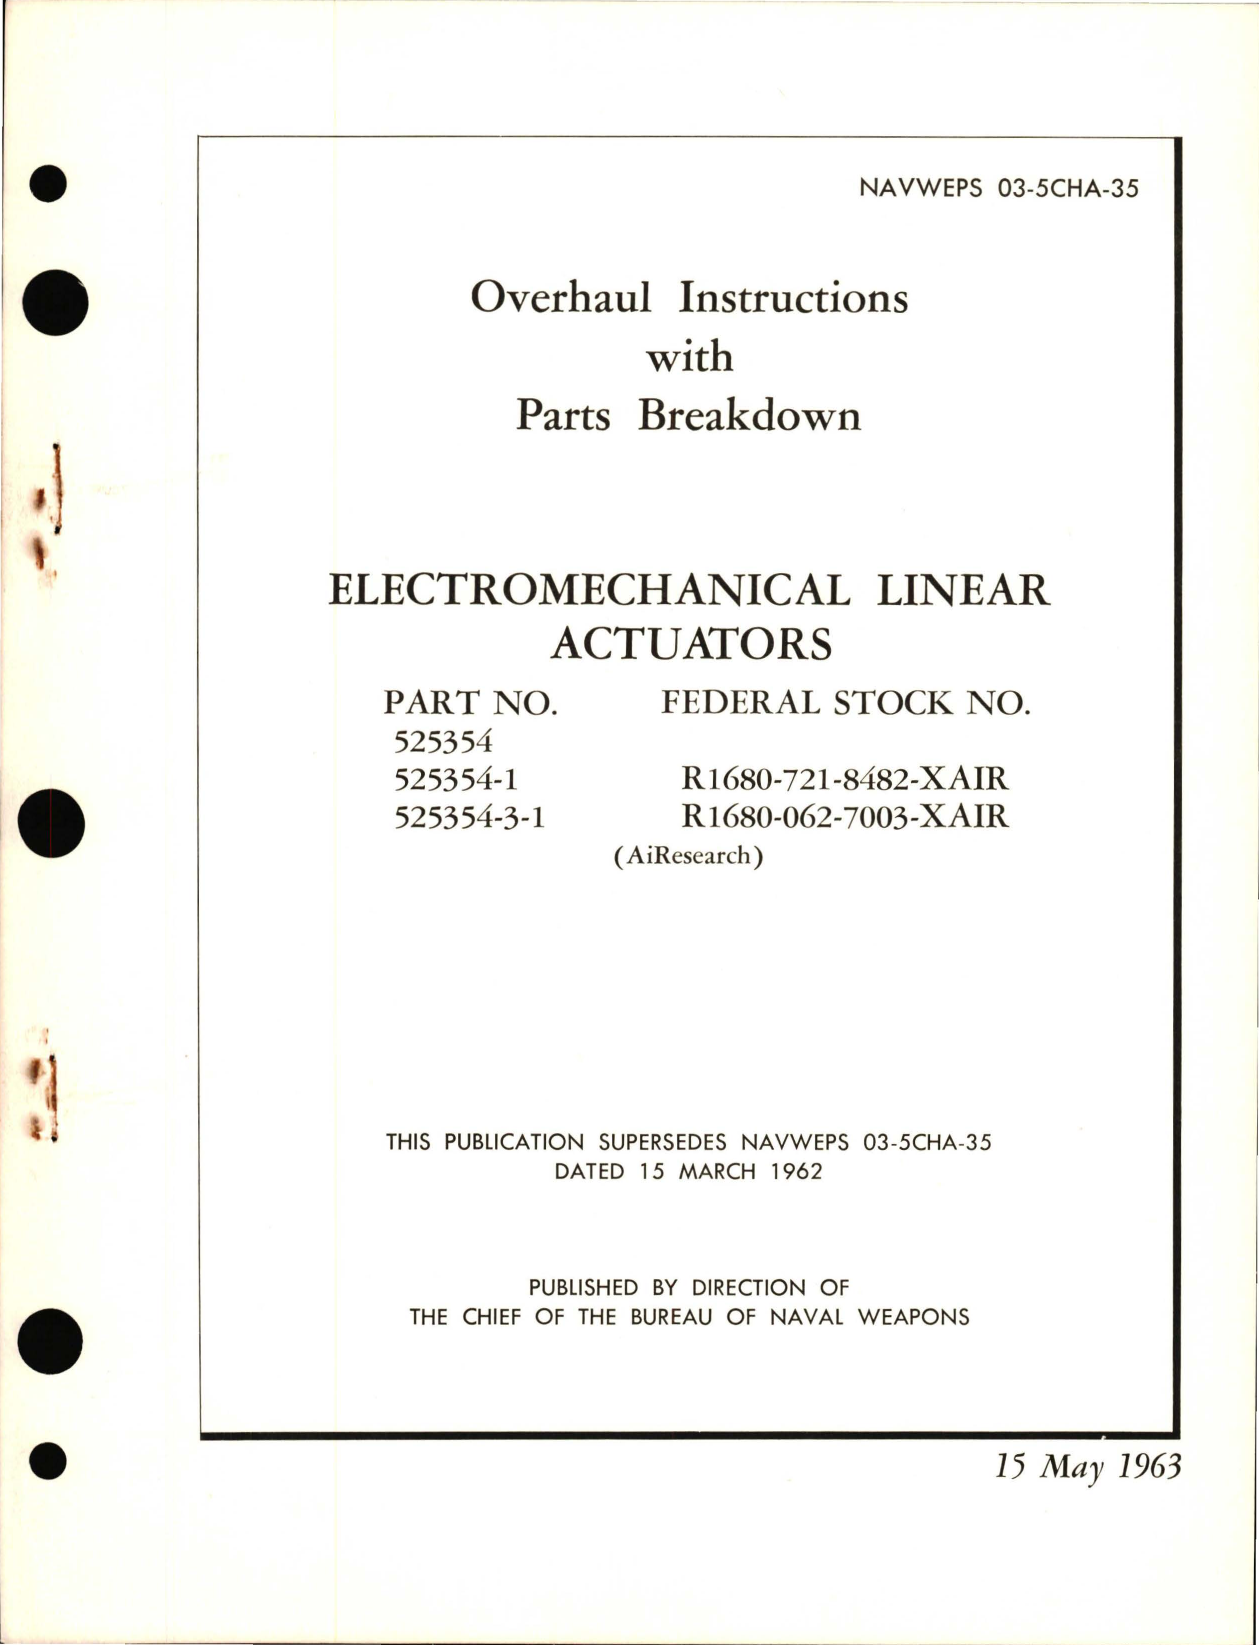 Sample page 1 from AirCorps Library document: Overhaul Instructions with Parts Breakdown for Electromechanical Linear Actuators